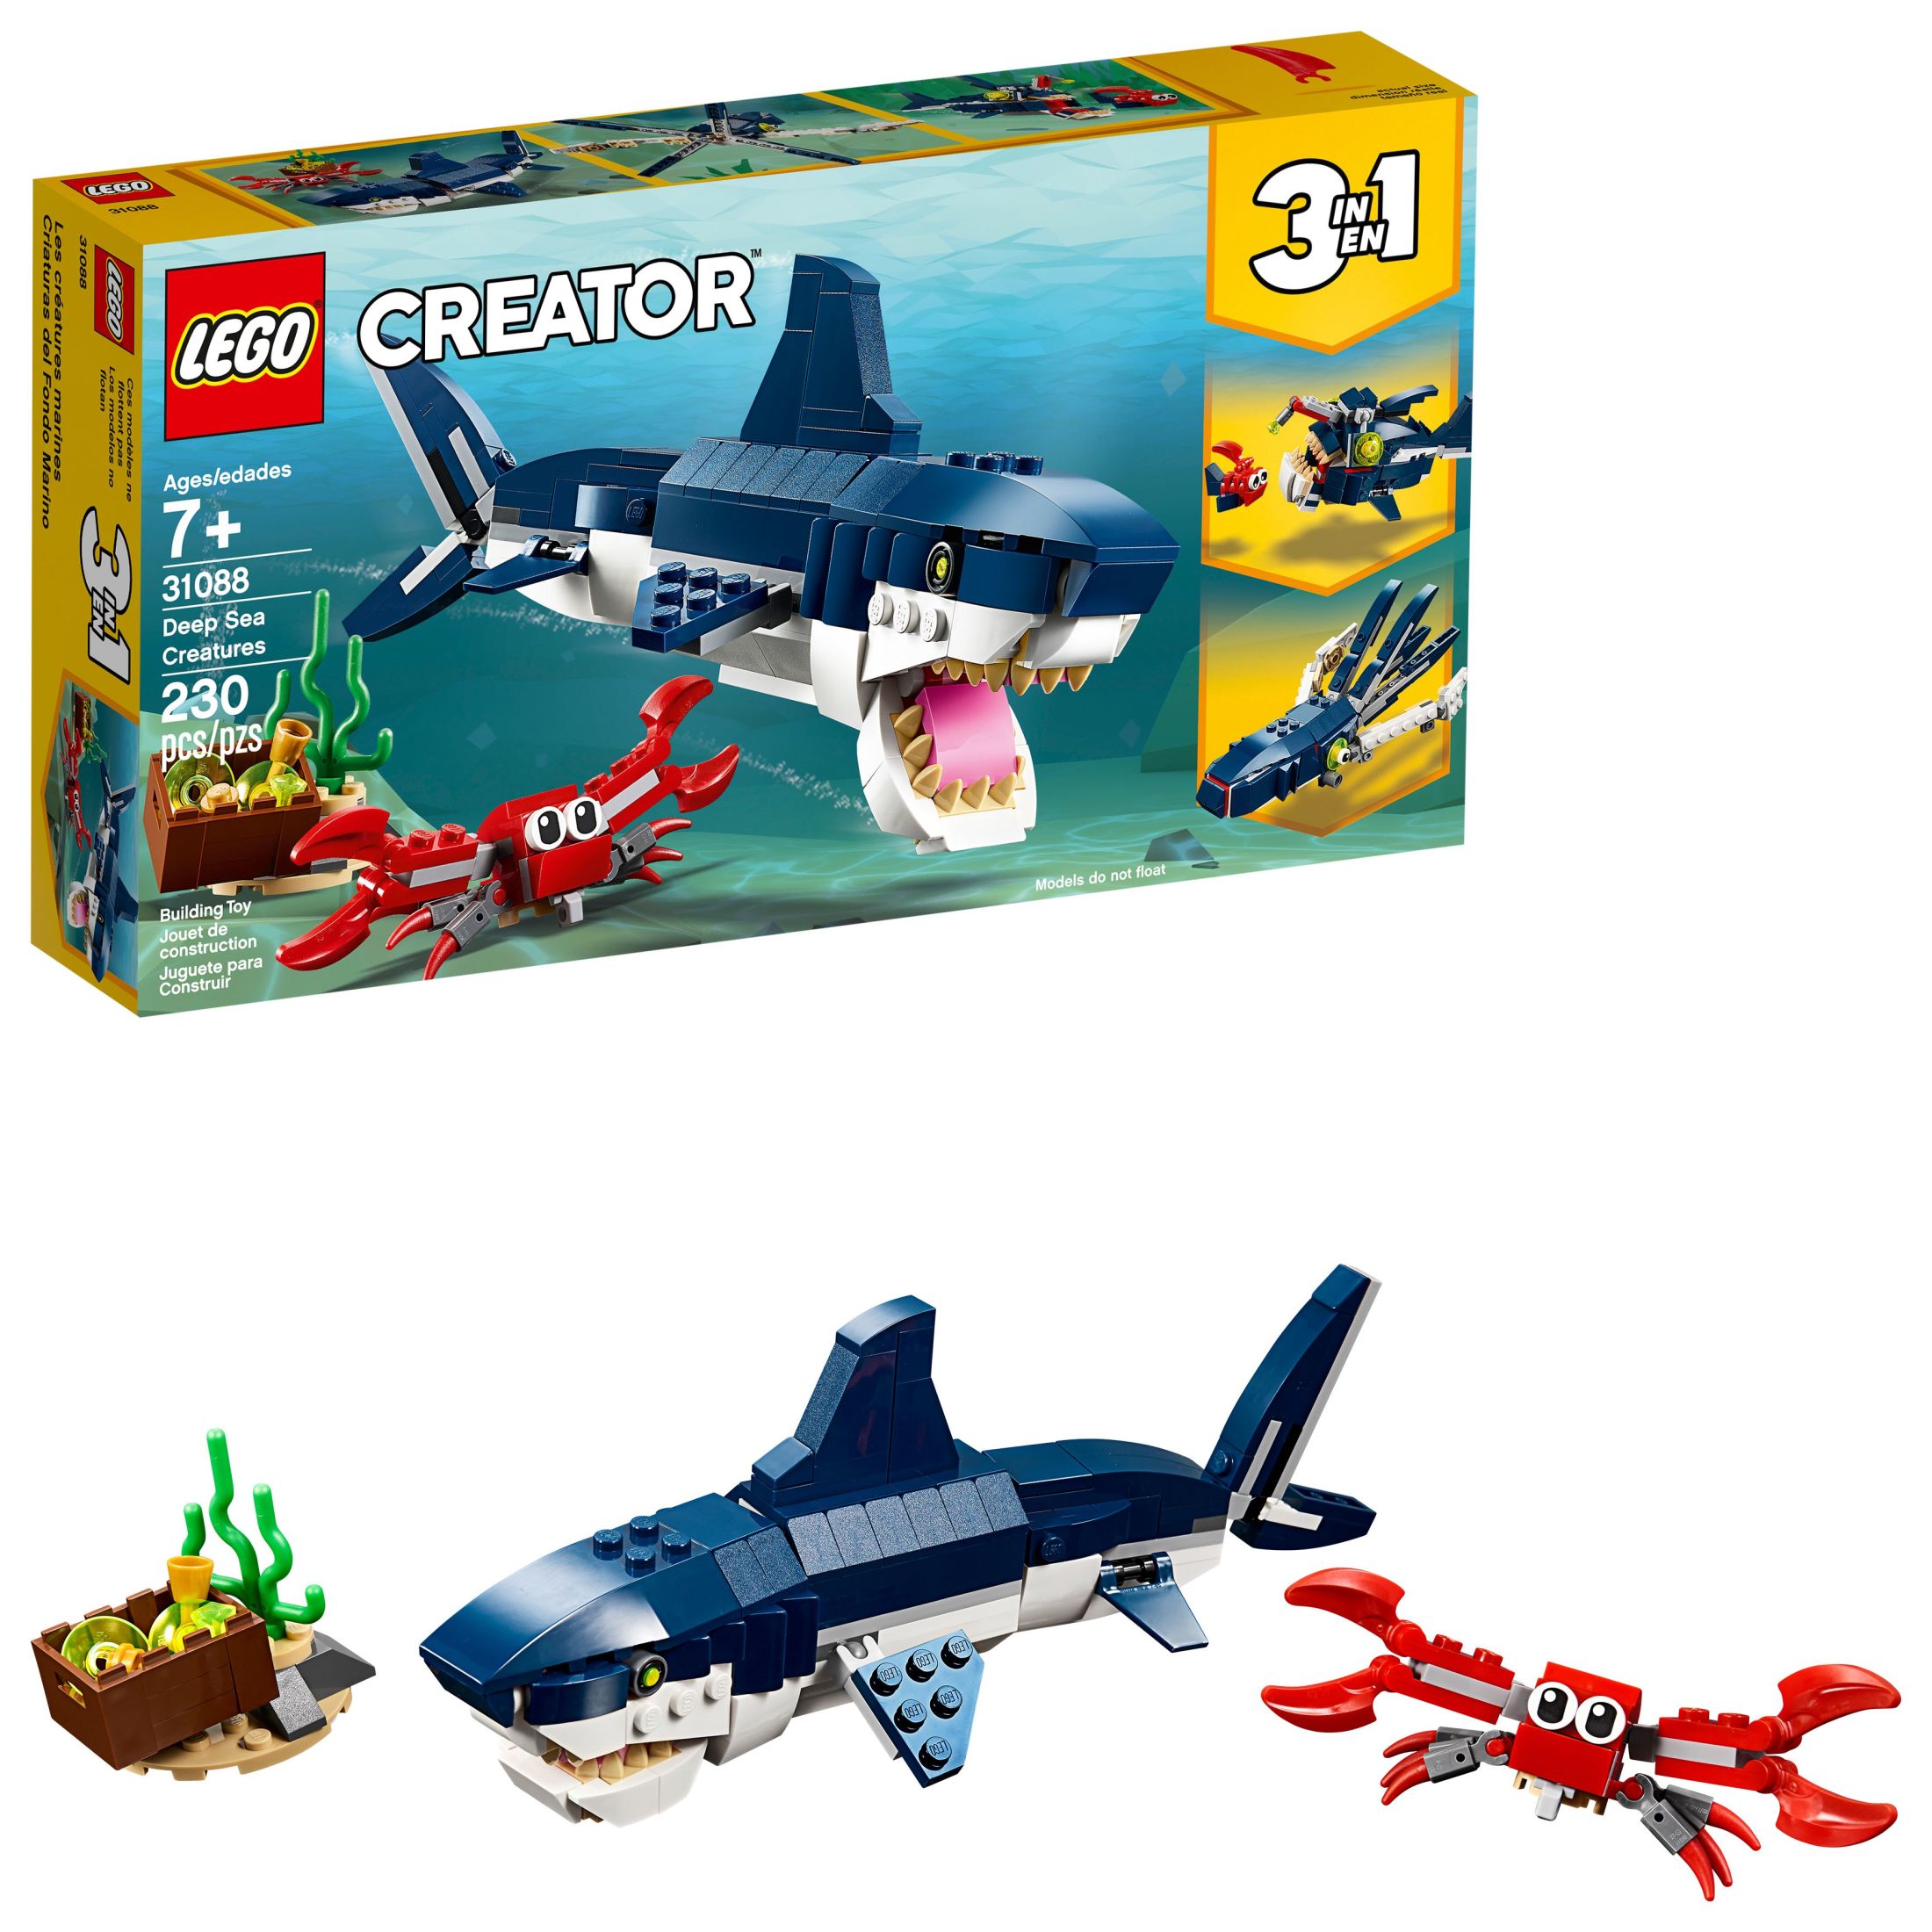 LEGO Creator 3 in 1 Deep Sea Creatures, Transforms from Shark and Crab to Squid to Angler Fish, Sea Animal Toys, Gifts for 7 Plus Year Old Girls and Boys, 31088 - image 1 of 6